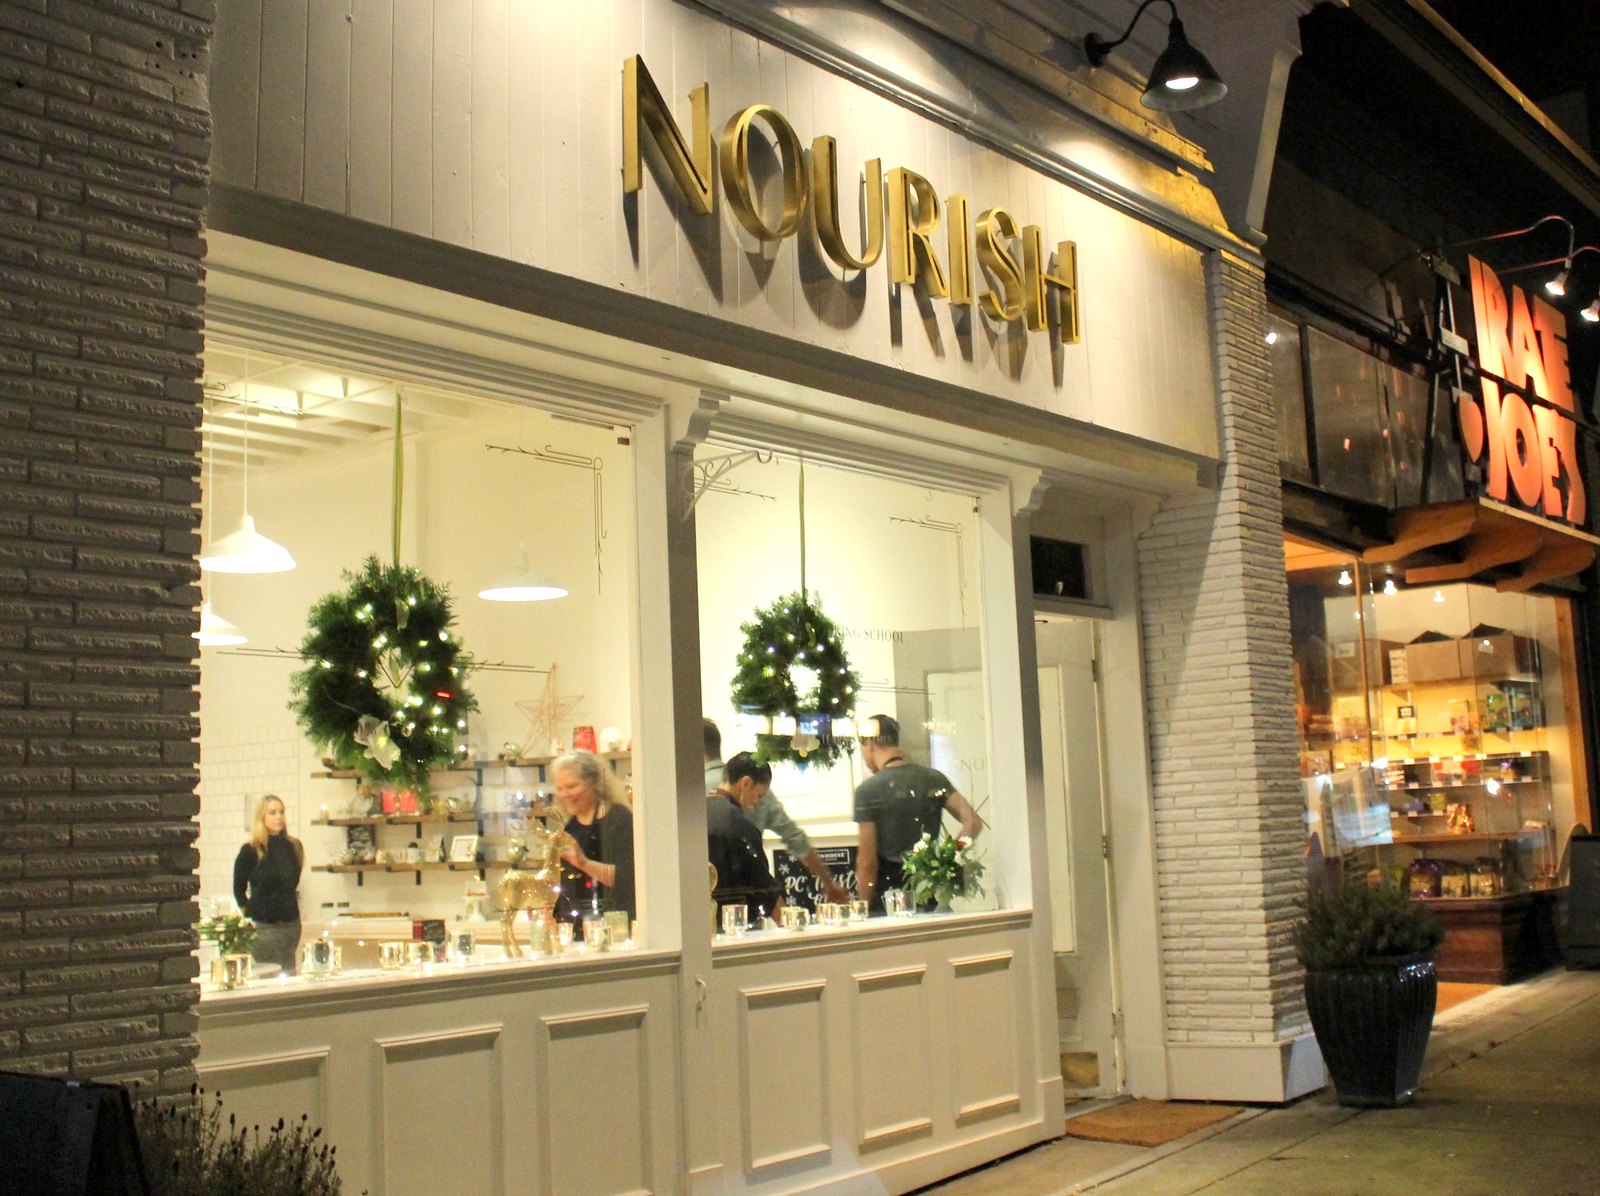 President's Choice Holiday Insiders Collection Party at Nourish Café